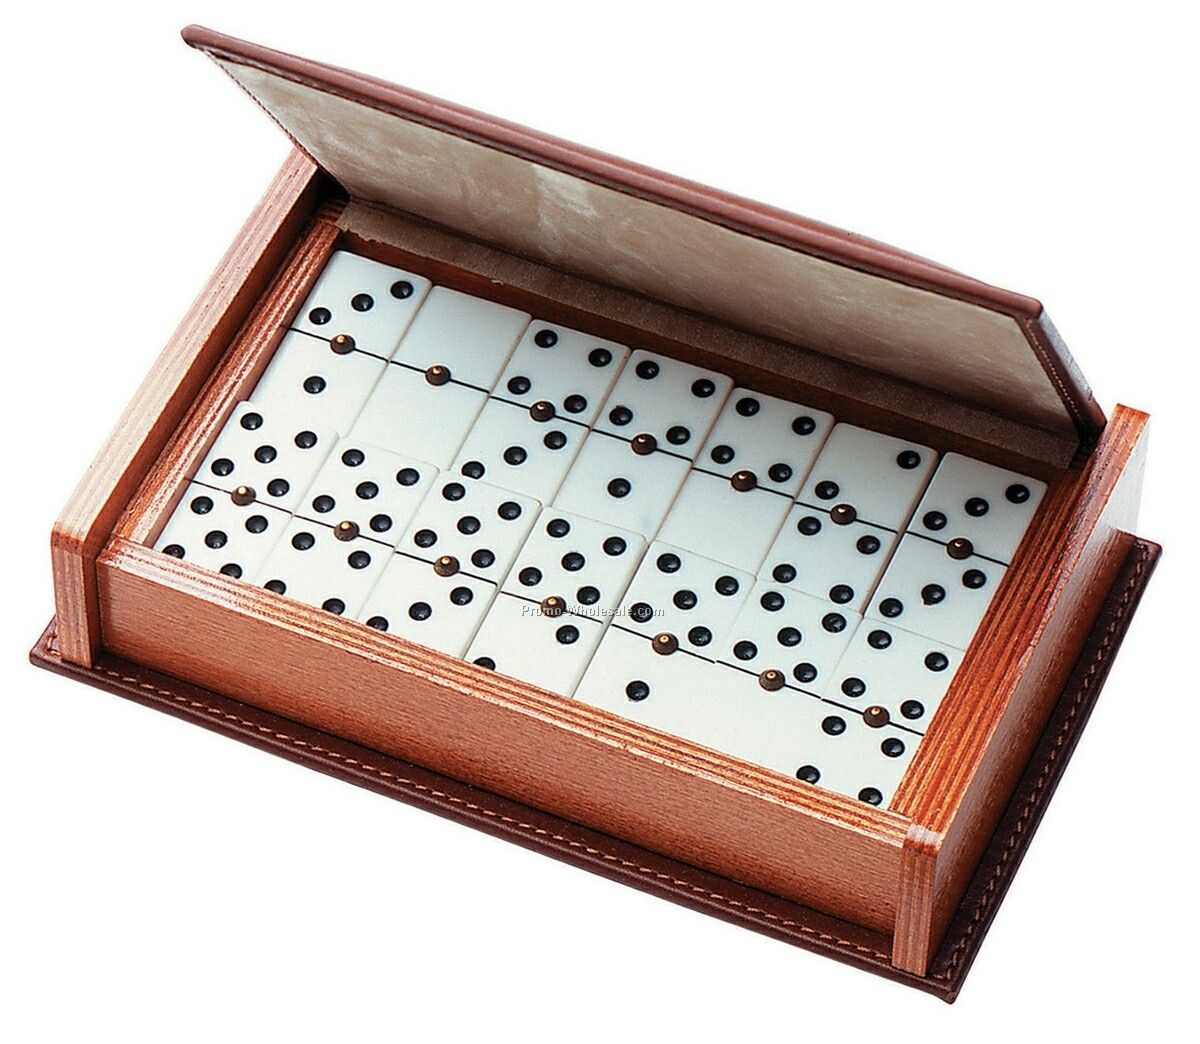 Domino Game In Wooden / Leather Box